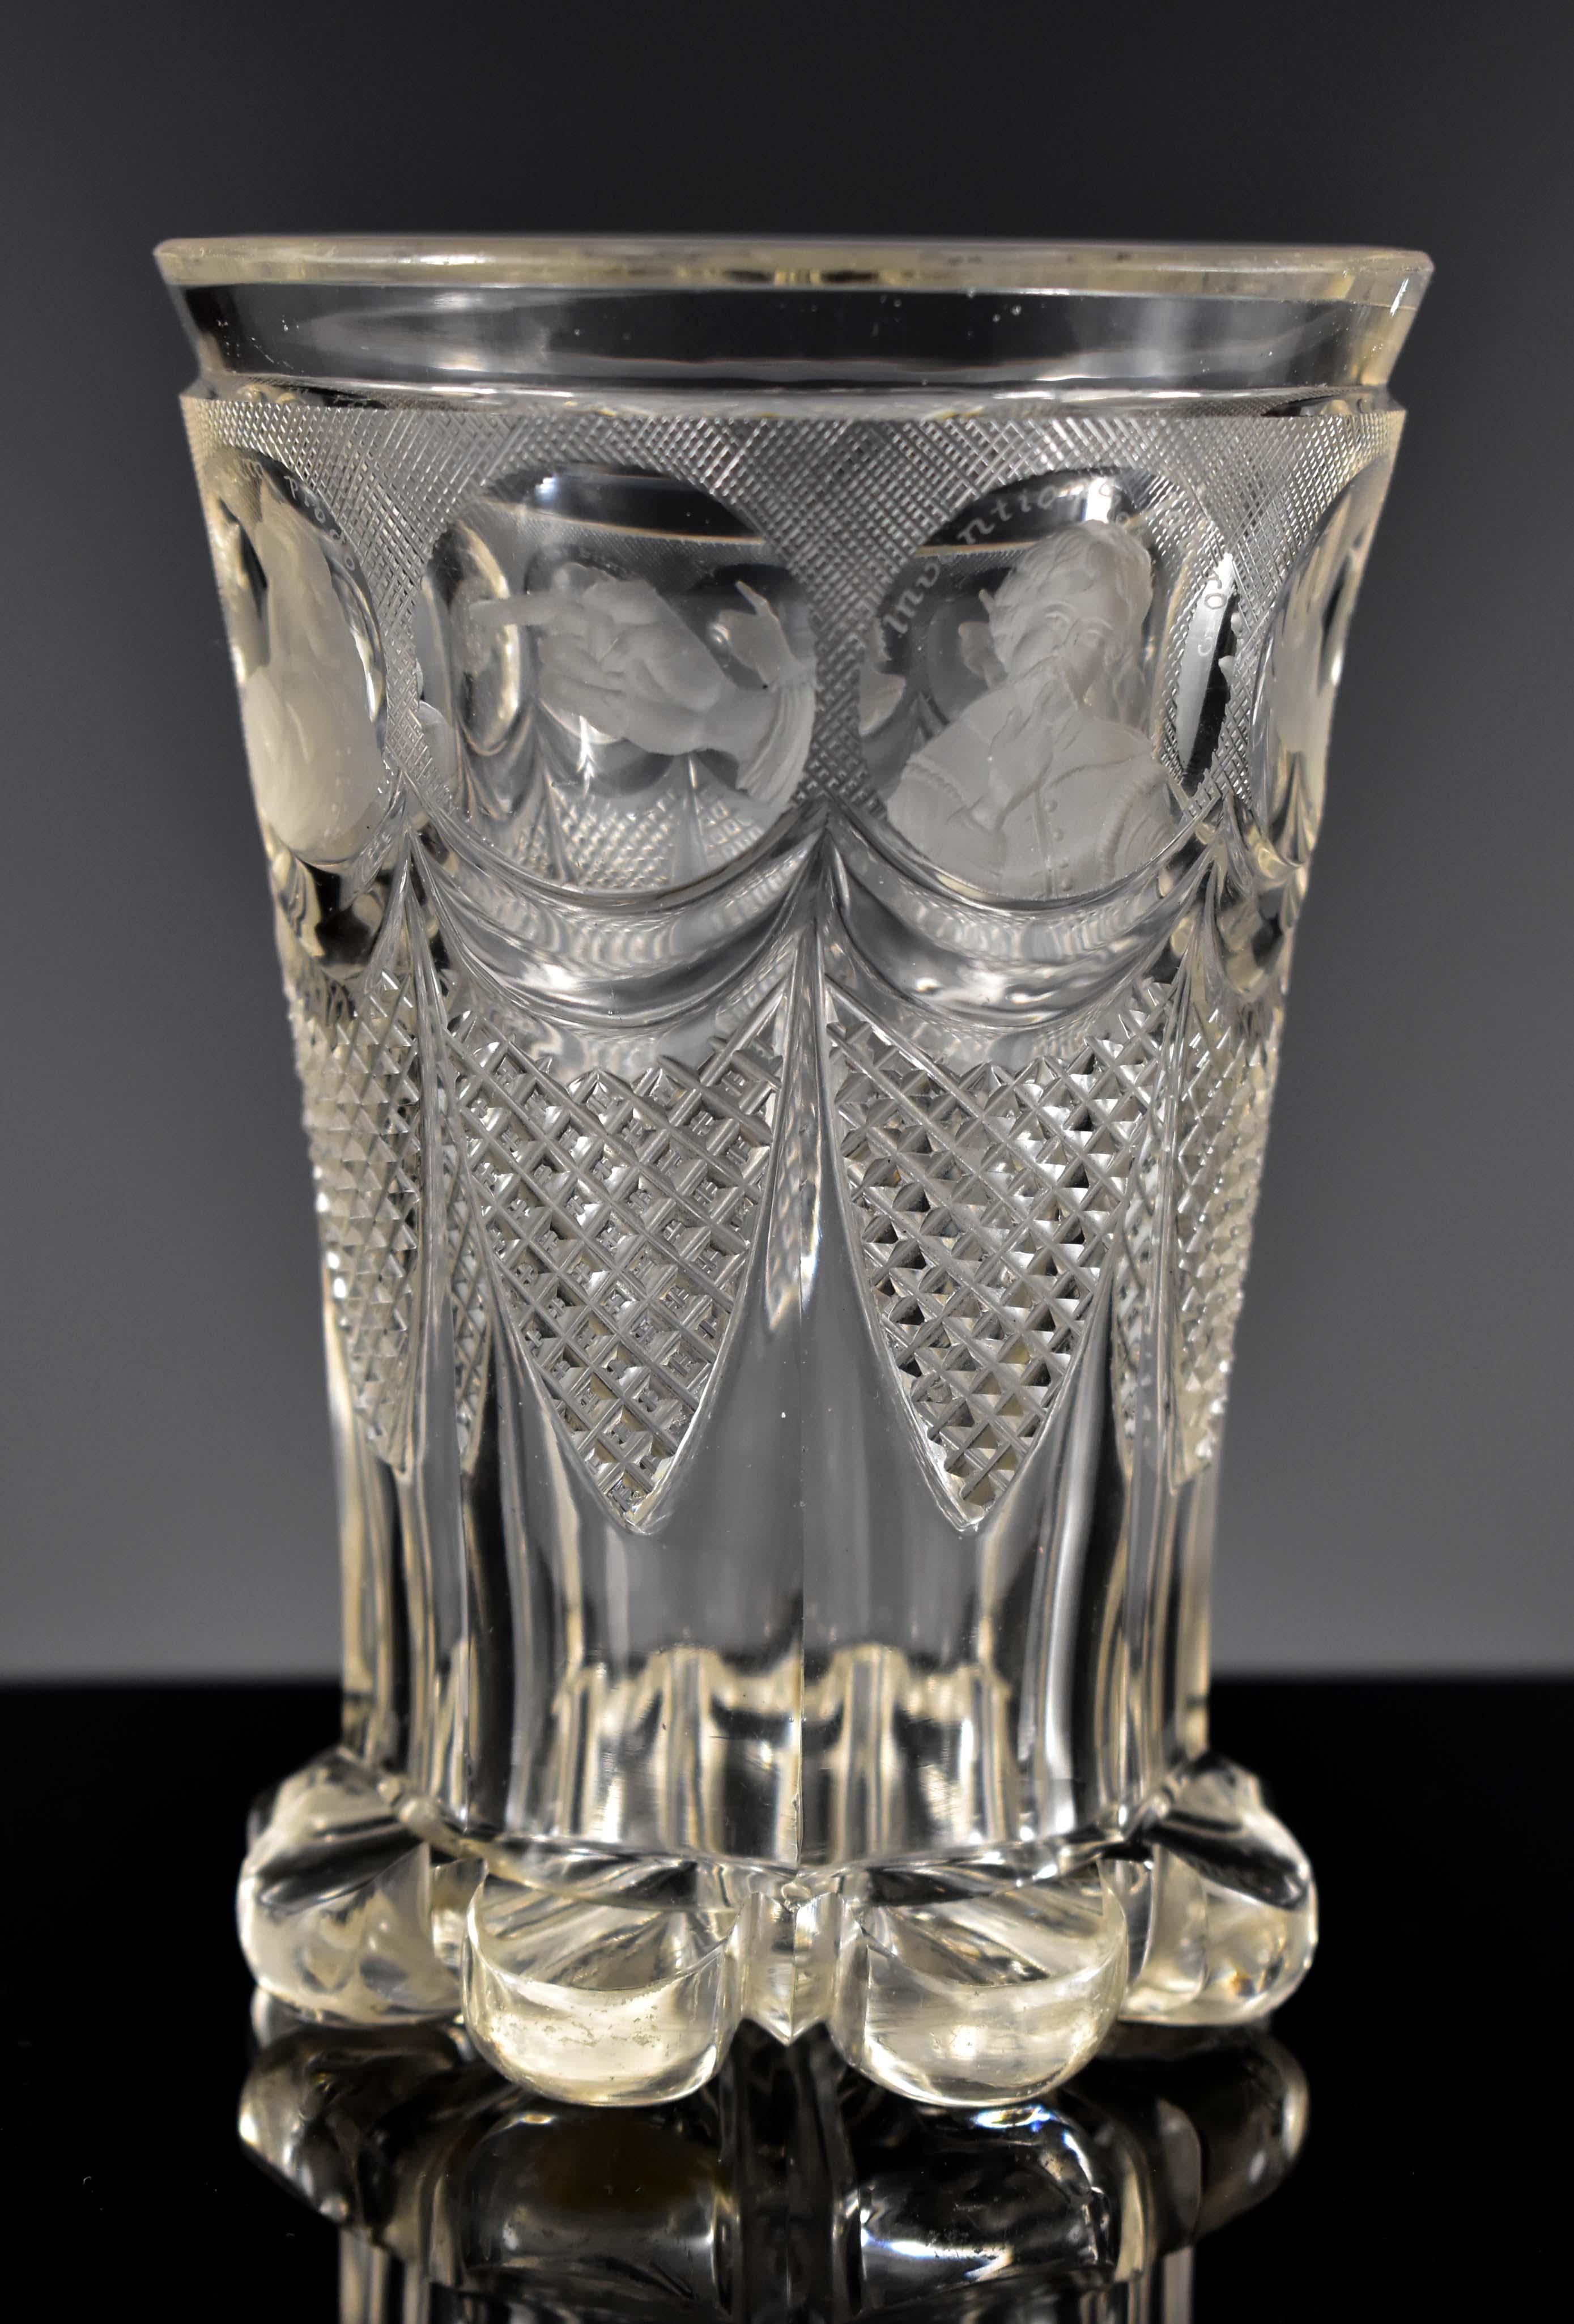 A very interesting antique masonic goblet with emblems, Emblems depicting portraits and Latin inscriptions,An interesting feature is the secret sign language, which was most likely used during meetings and secret negotiations between